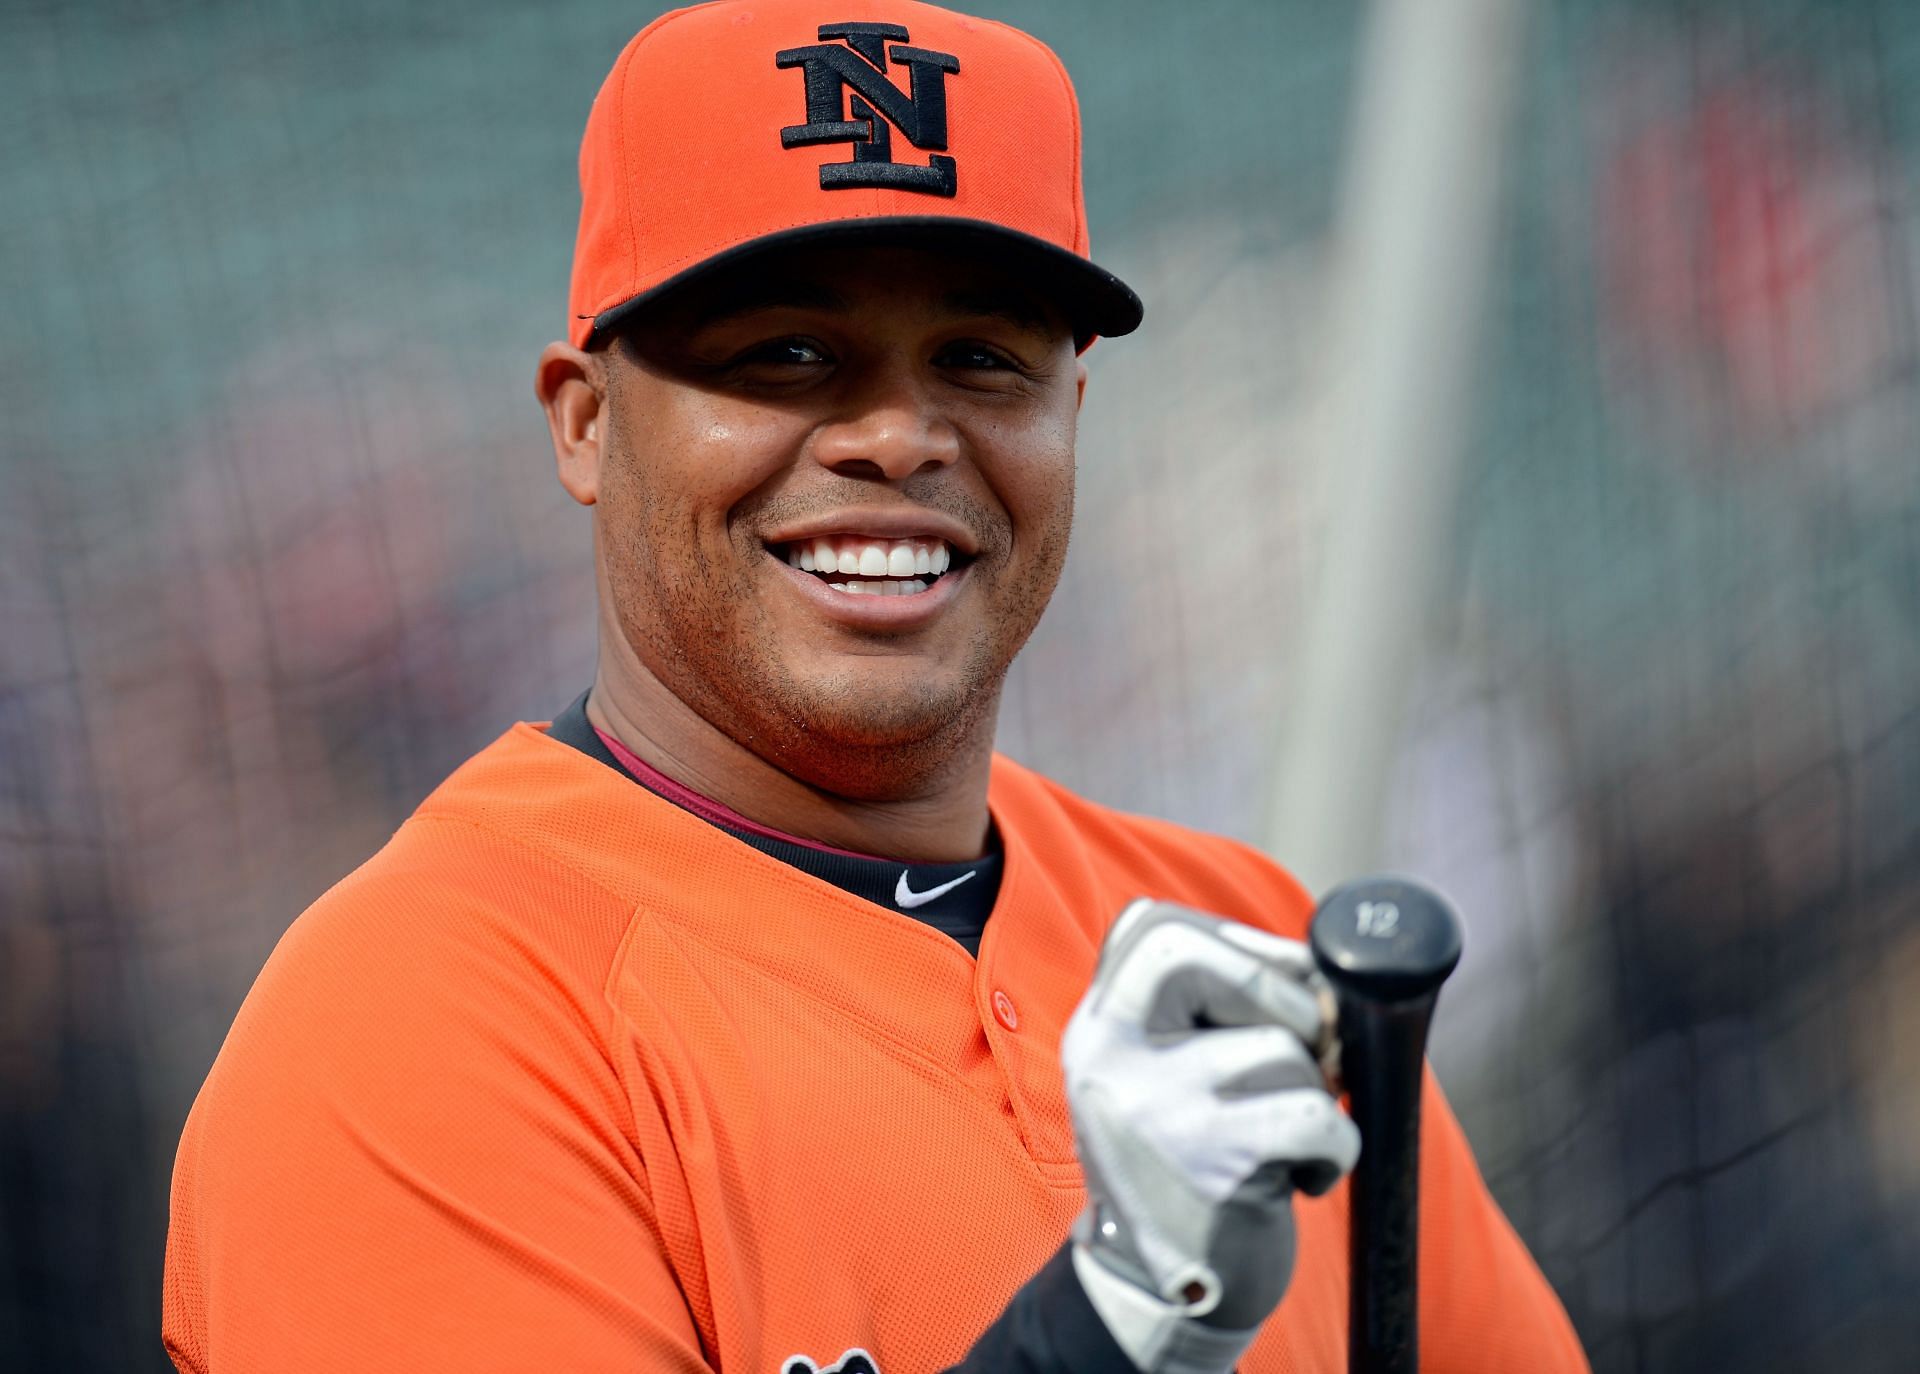 Andruw Jones Hall of Fame: 3 Reasons why Andruw Jones should be in